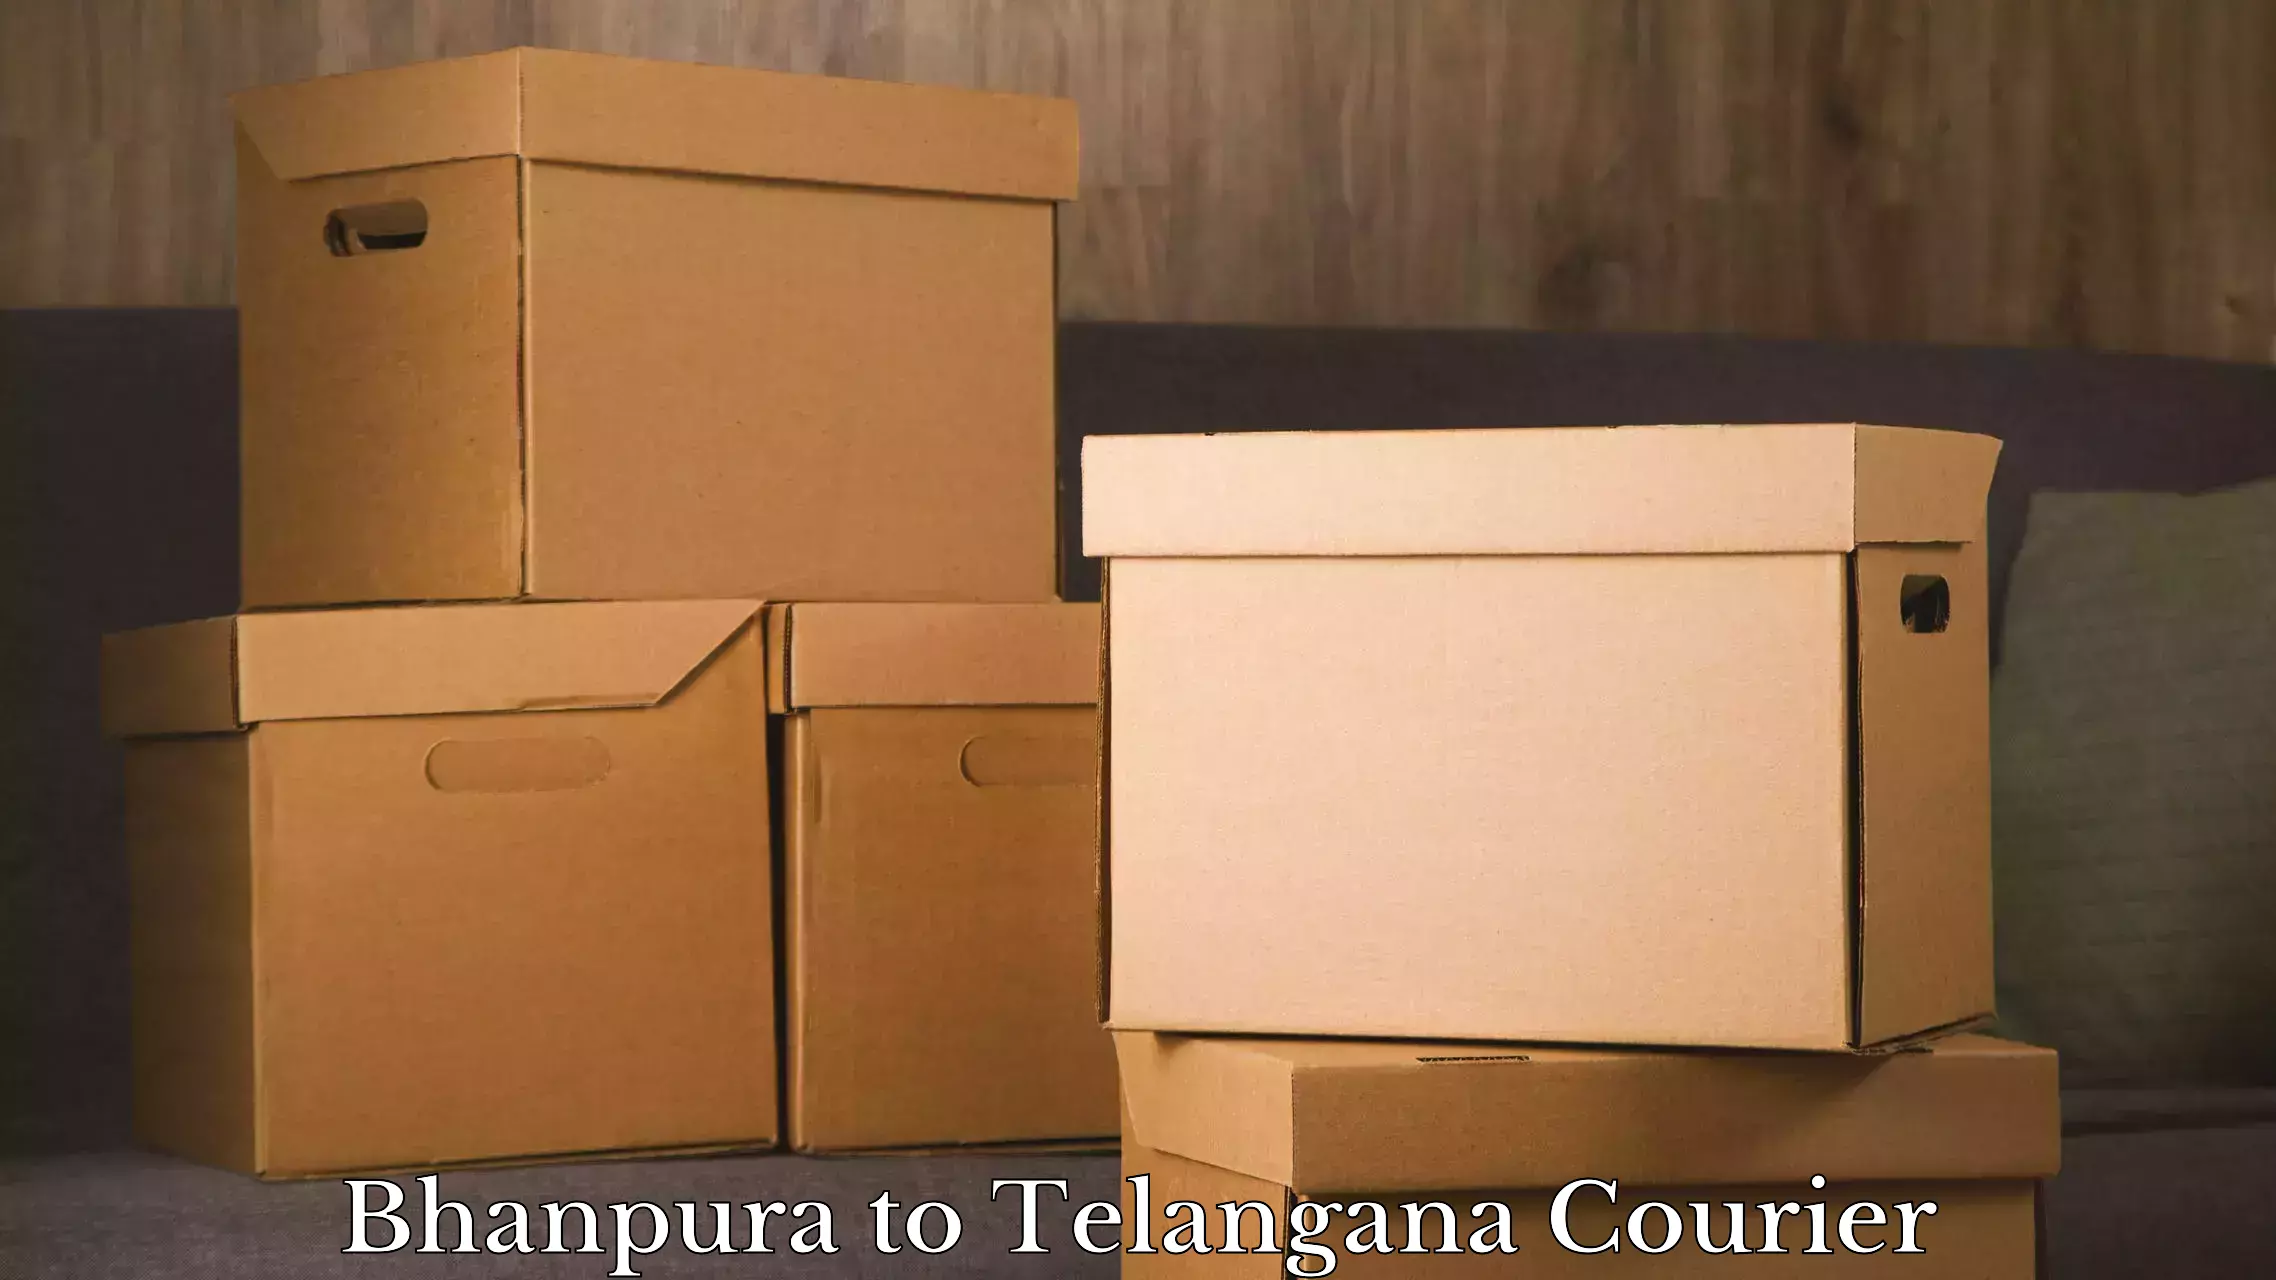 Luggage delivery logistics in Bhanpura to Dharmapuri Jagtial